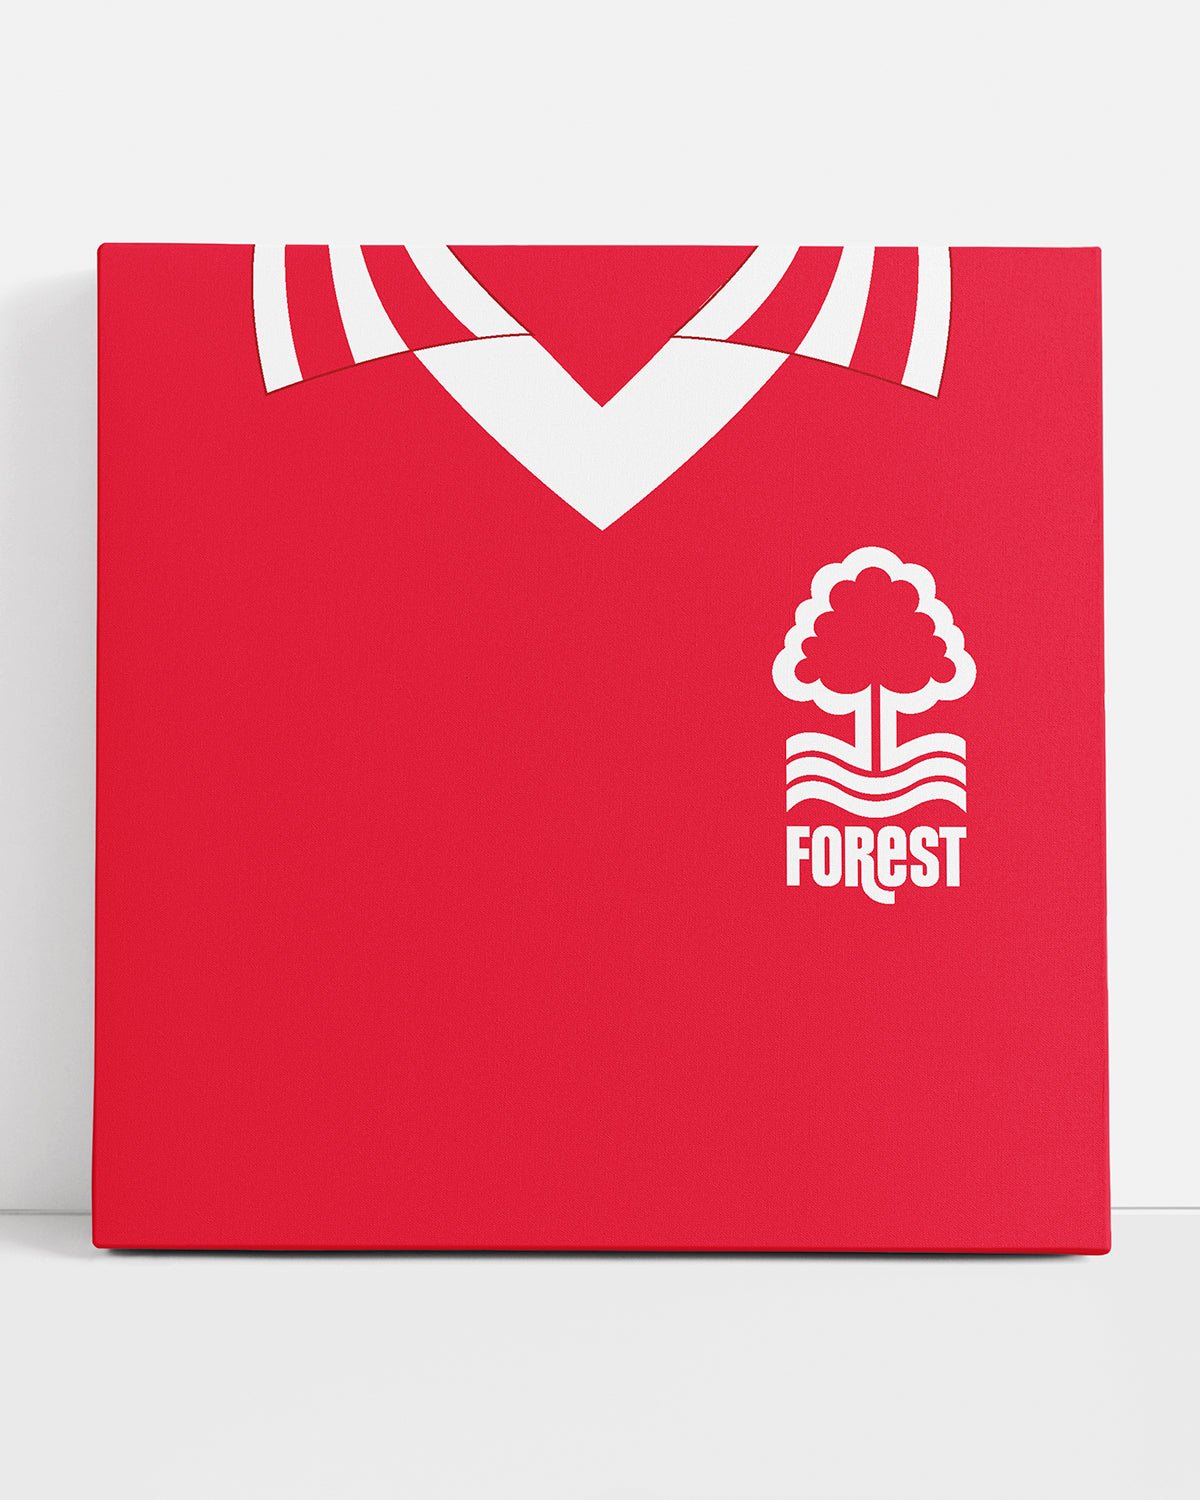 NFFC 1976 Retro Canvas - Nottingham Forest FC